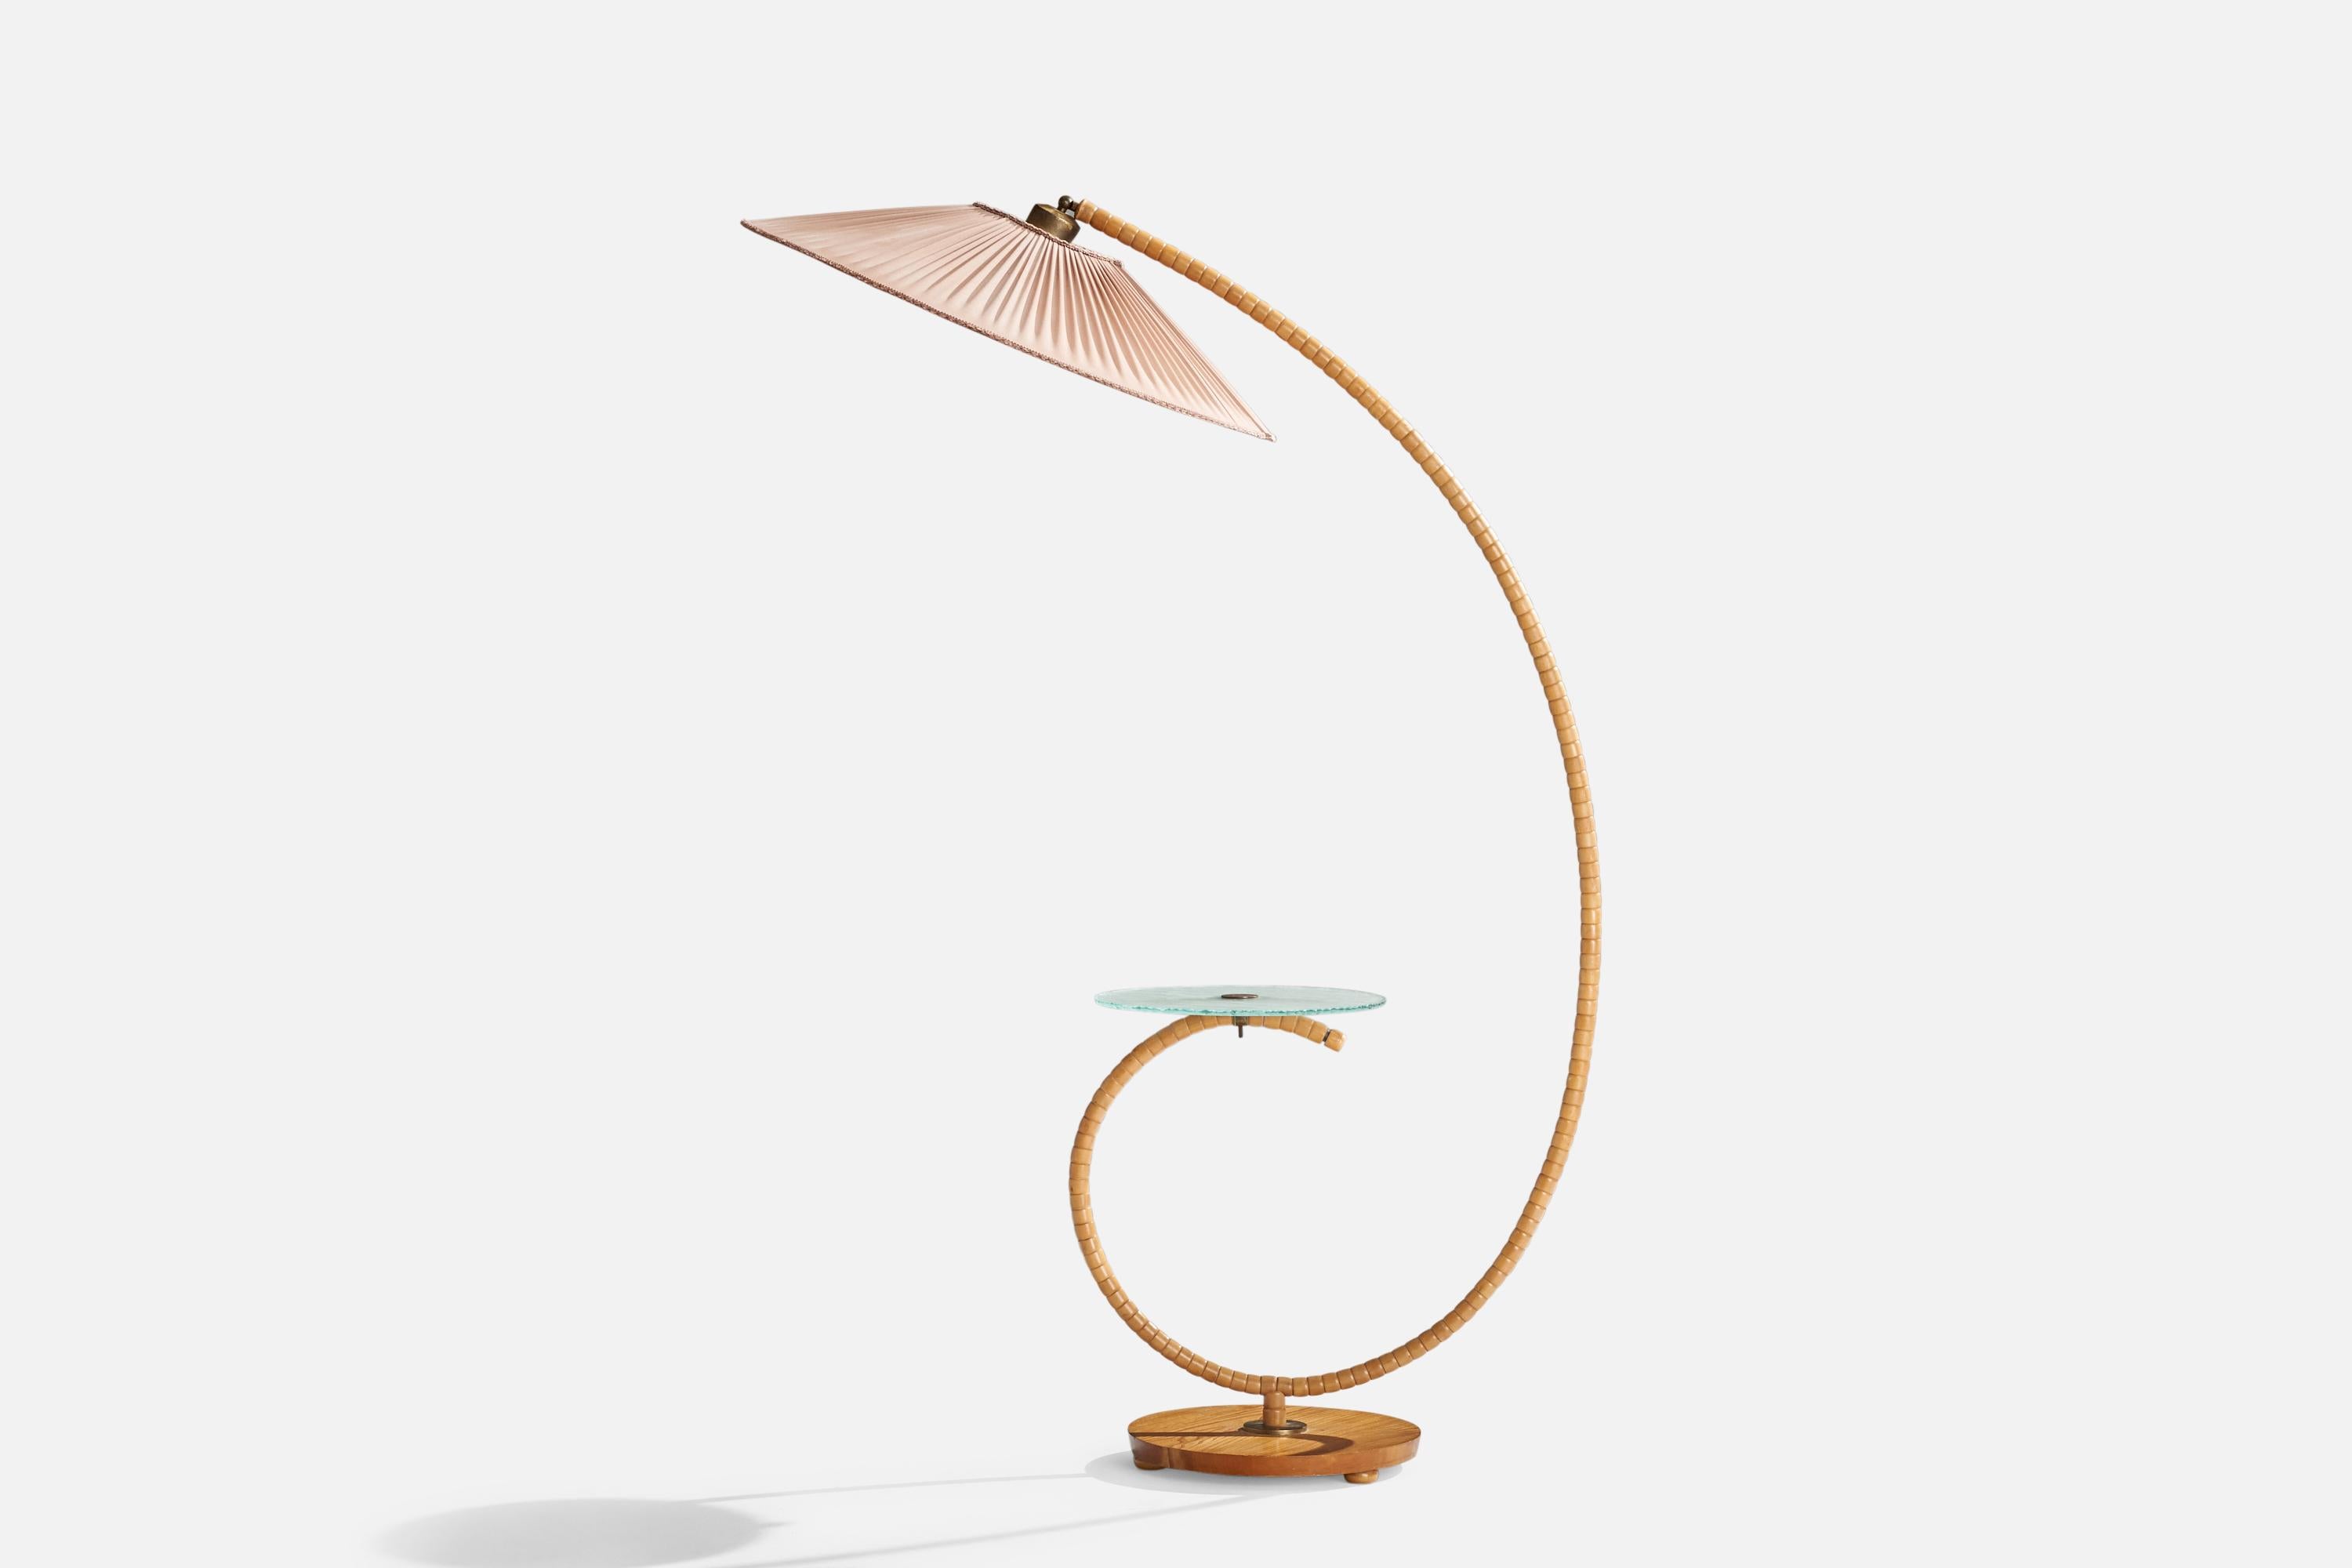 A wood, glass, opaline glass, brass and pink fabric floor lamp or lamp table designed and produced in Sweden, 1930s.

Overall Dimensions (inches): 64.5 H x 30”  W x 45.5” D
Stated dimensions include shade.
Bulb Specifications: E-26 Bulb
Number of